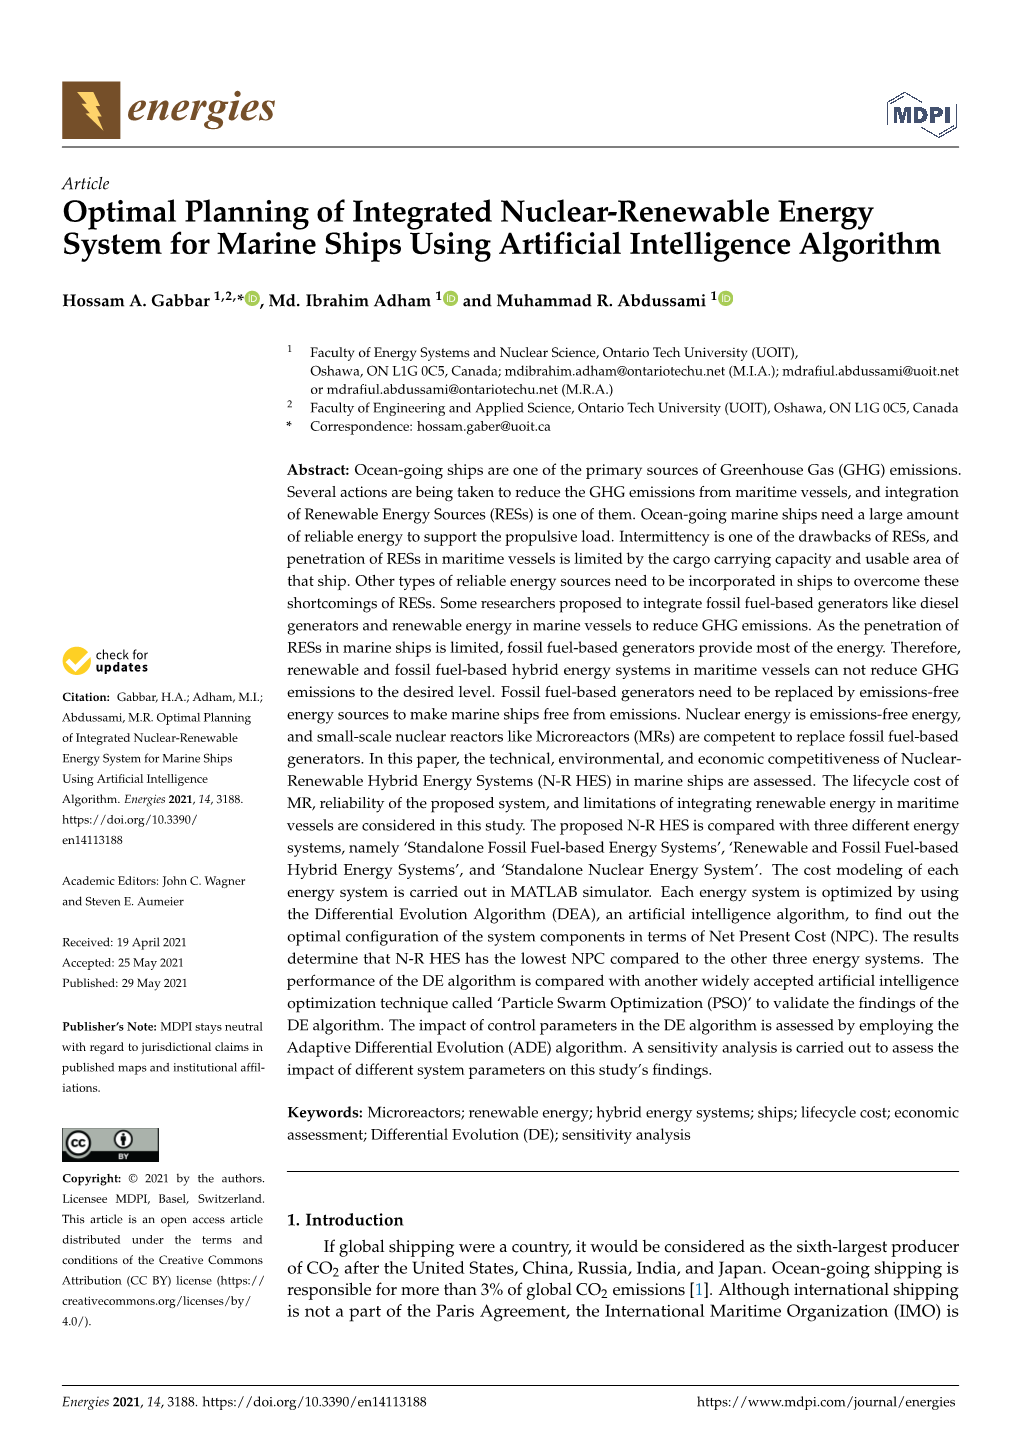 Optimal Planning of Integrated Nuclear-Renewable Energy System for Marine Ships Using Artificial Intelligence Algorithm